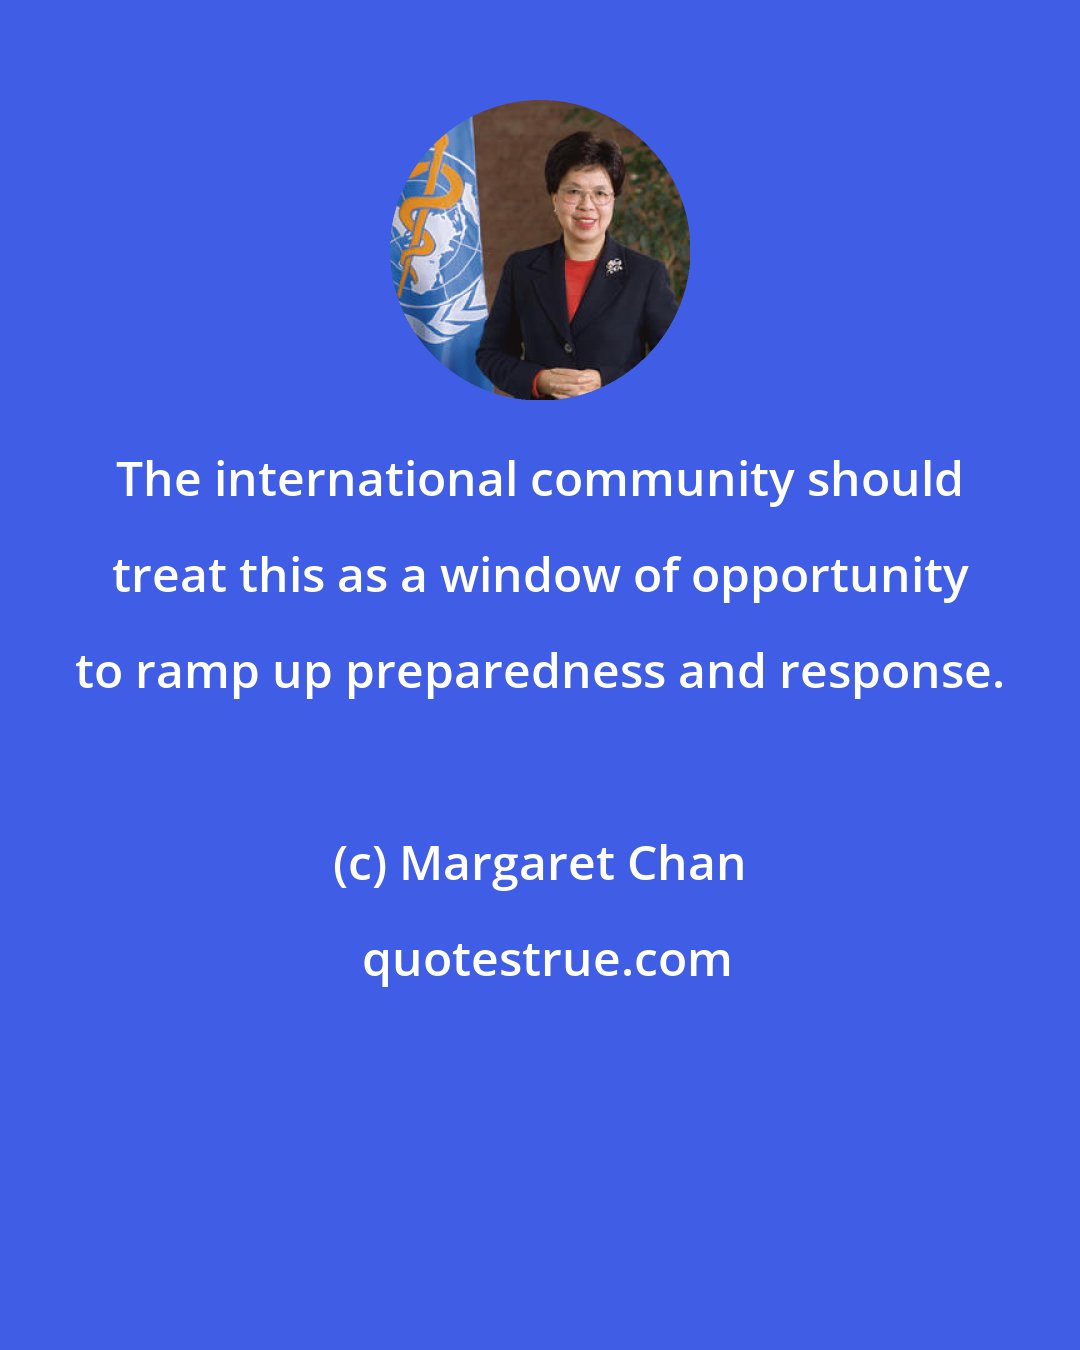 Margaret Chan: The international community should treat this as a window of opportunity to ramp up preparedness and response.